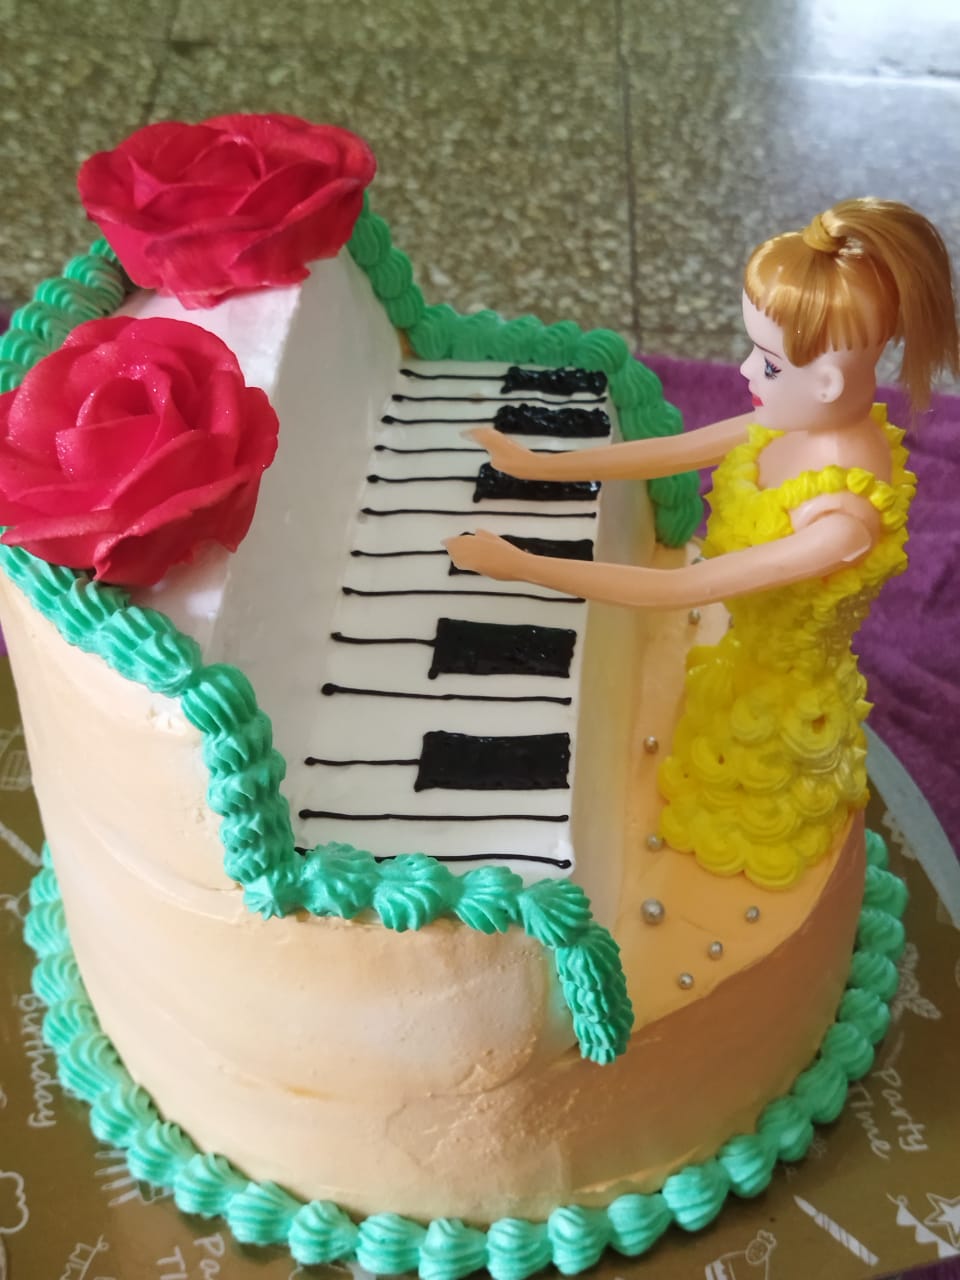 Doll Piano Cake Designs, Images, Price Near Me